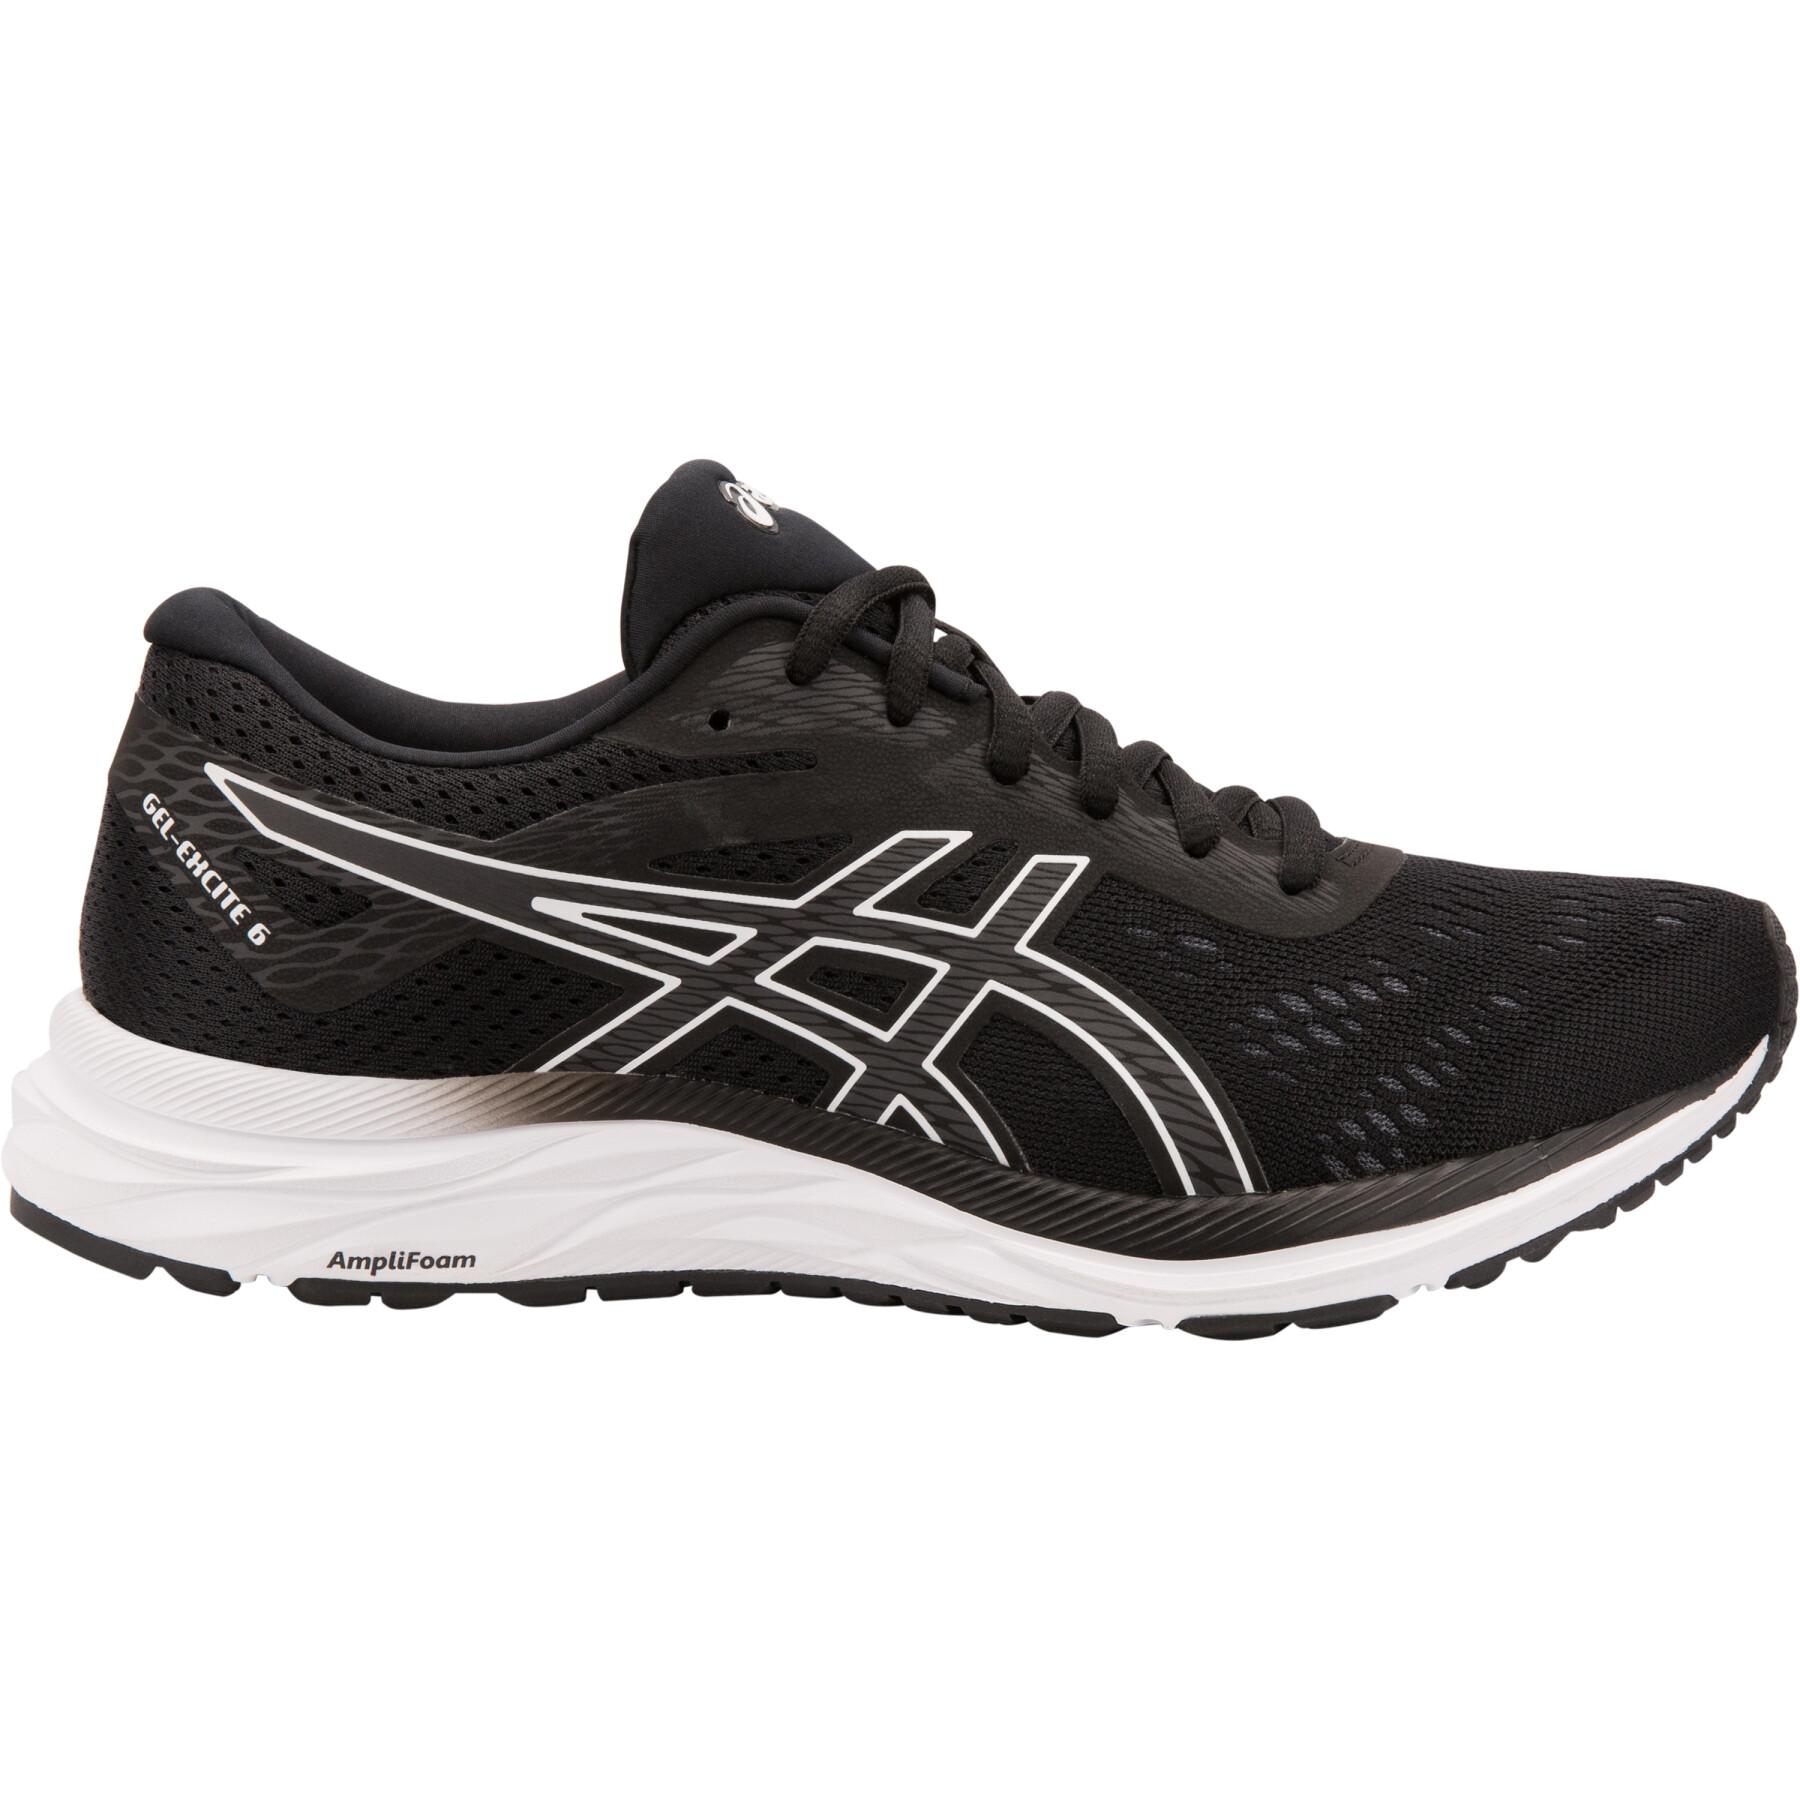 Women's shoes Asics Gel-Excite 6